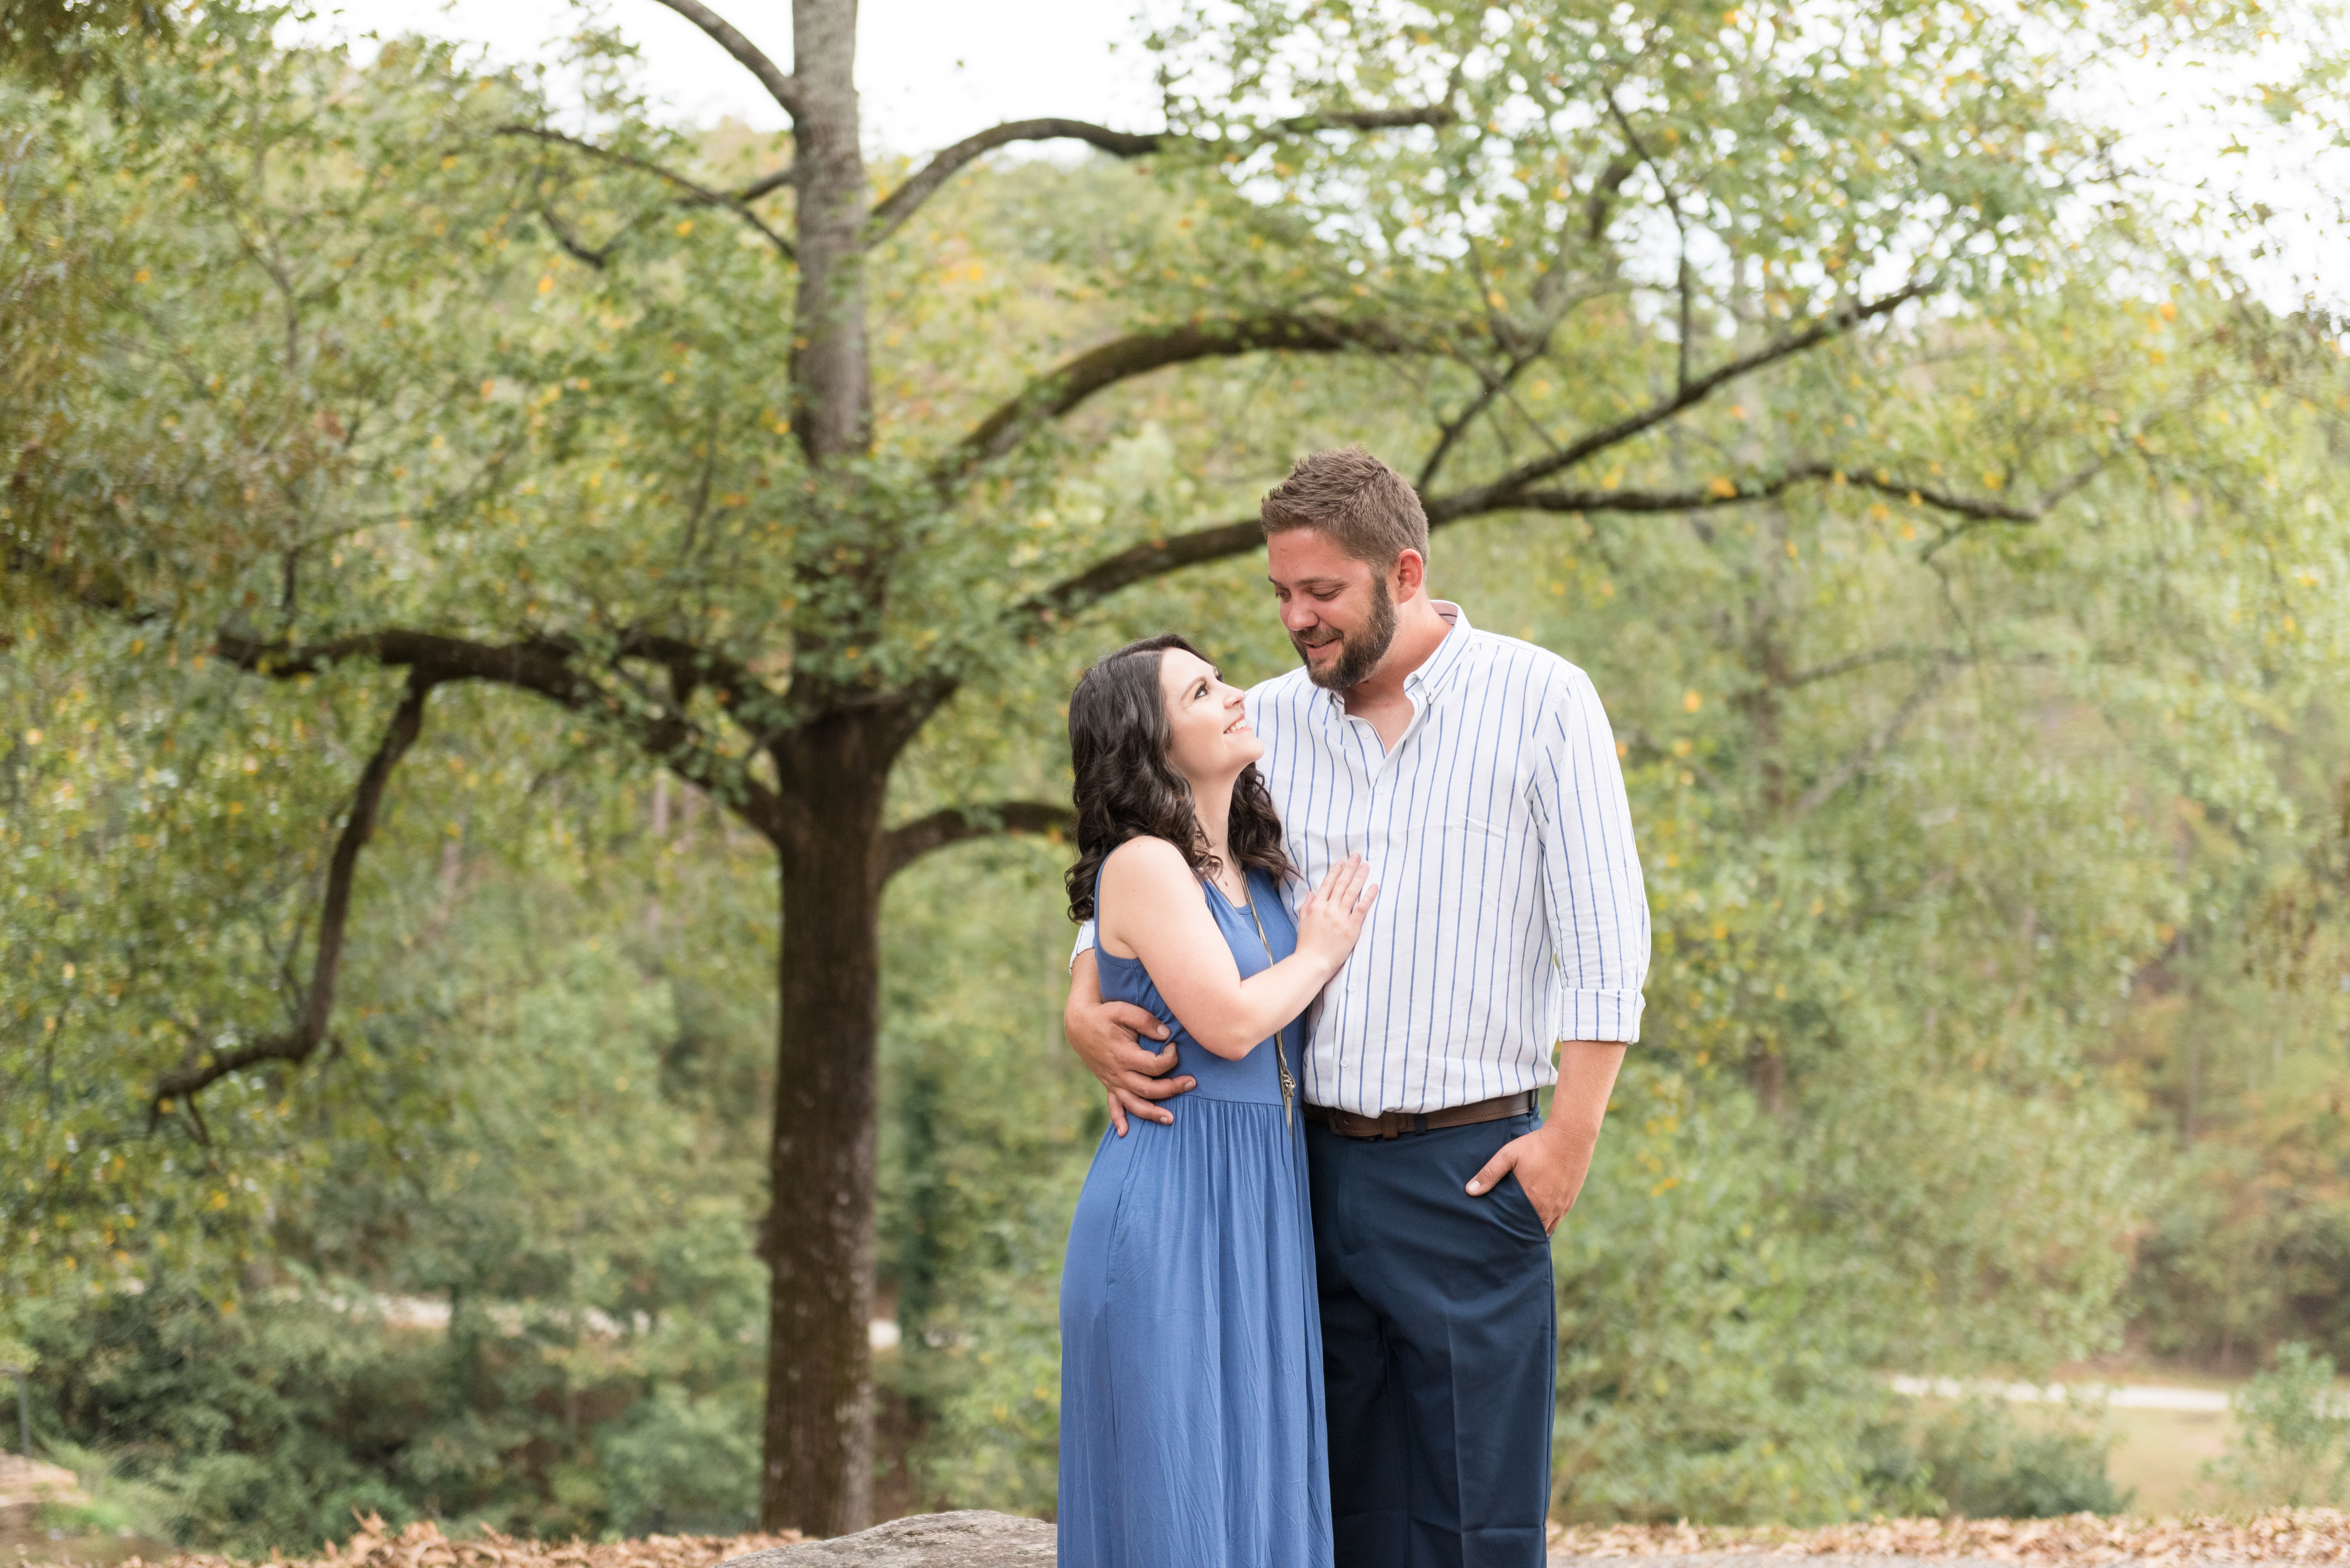 Capturing Bliss Photography Brittany + Matthew Engagement Session at Sells Mill Park